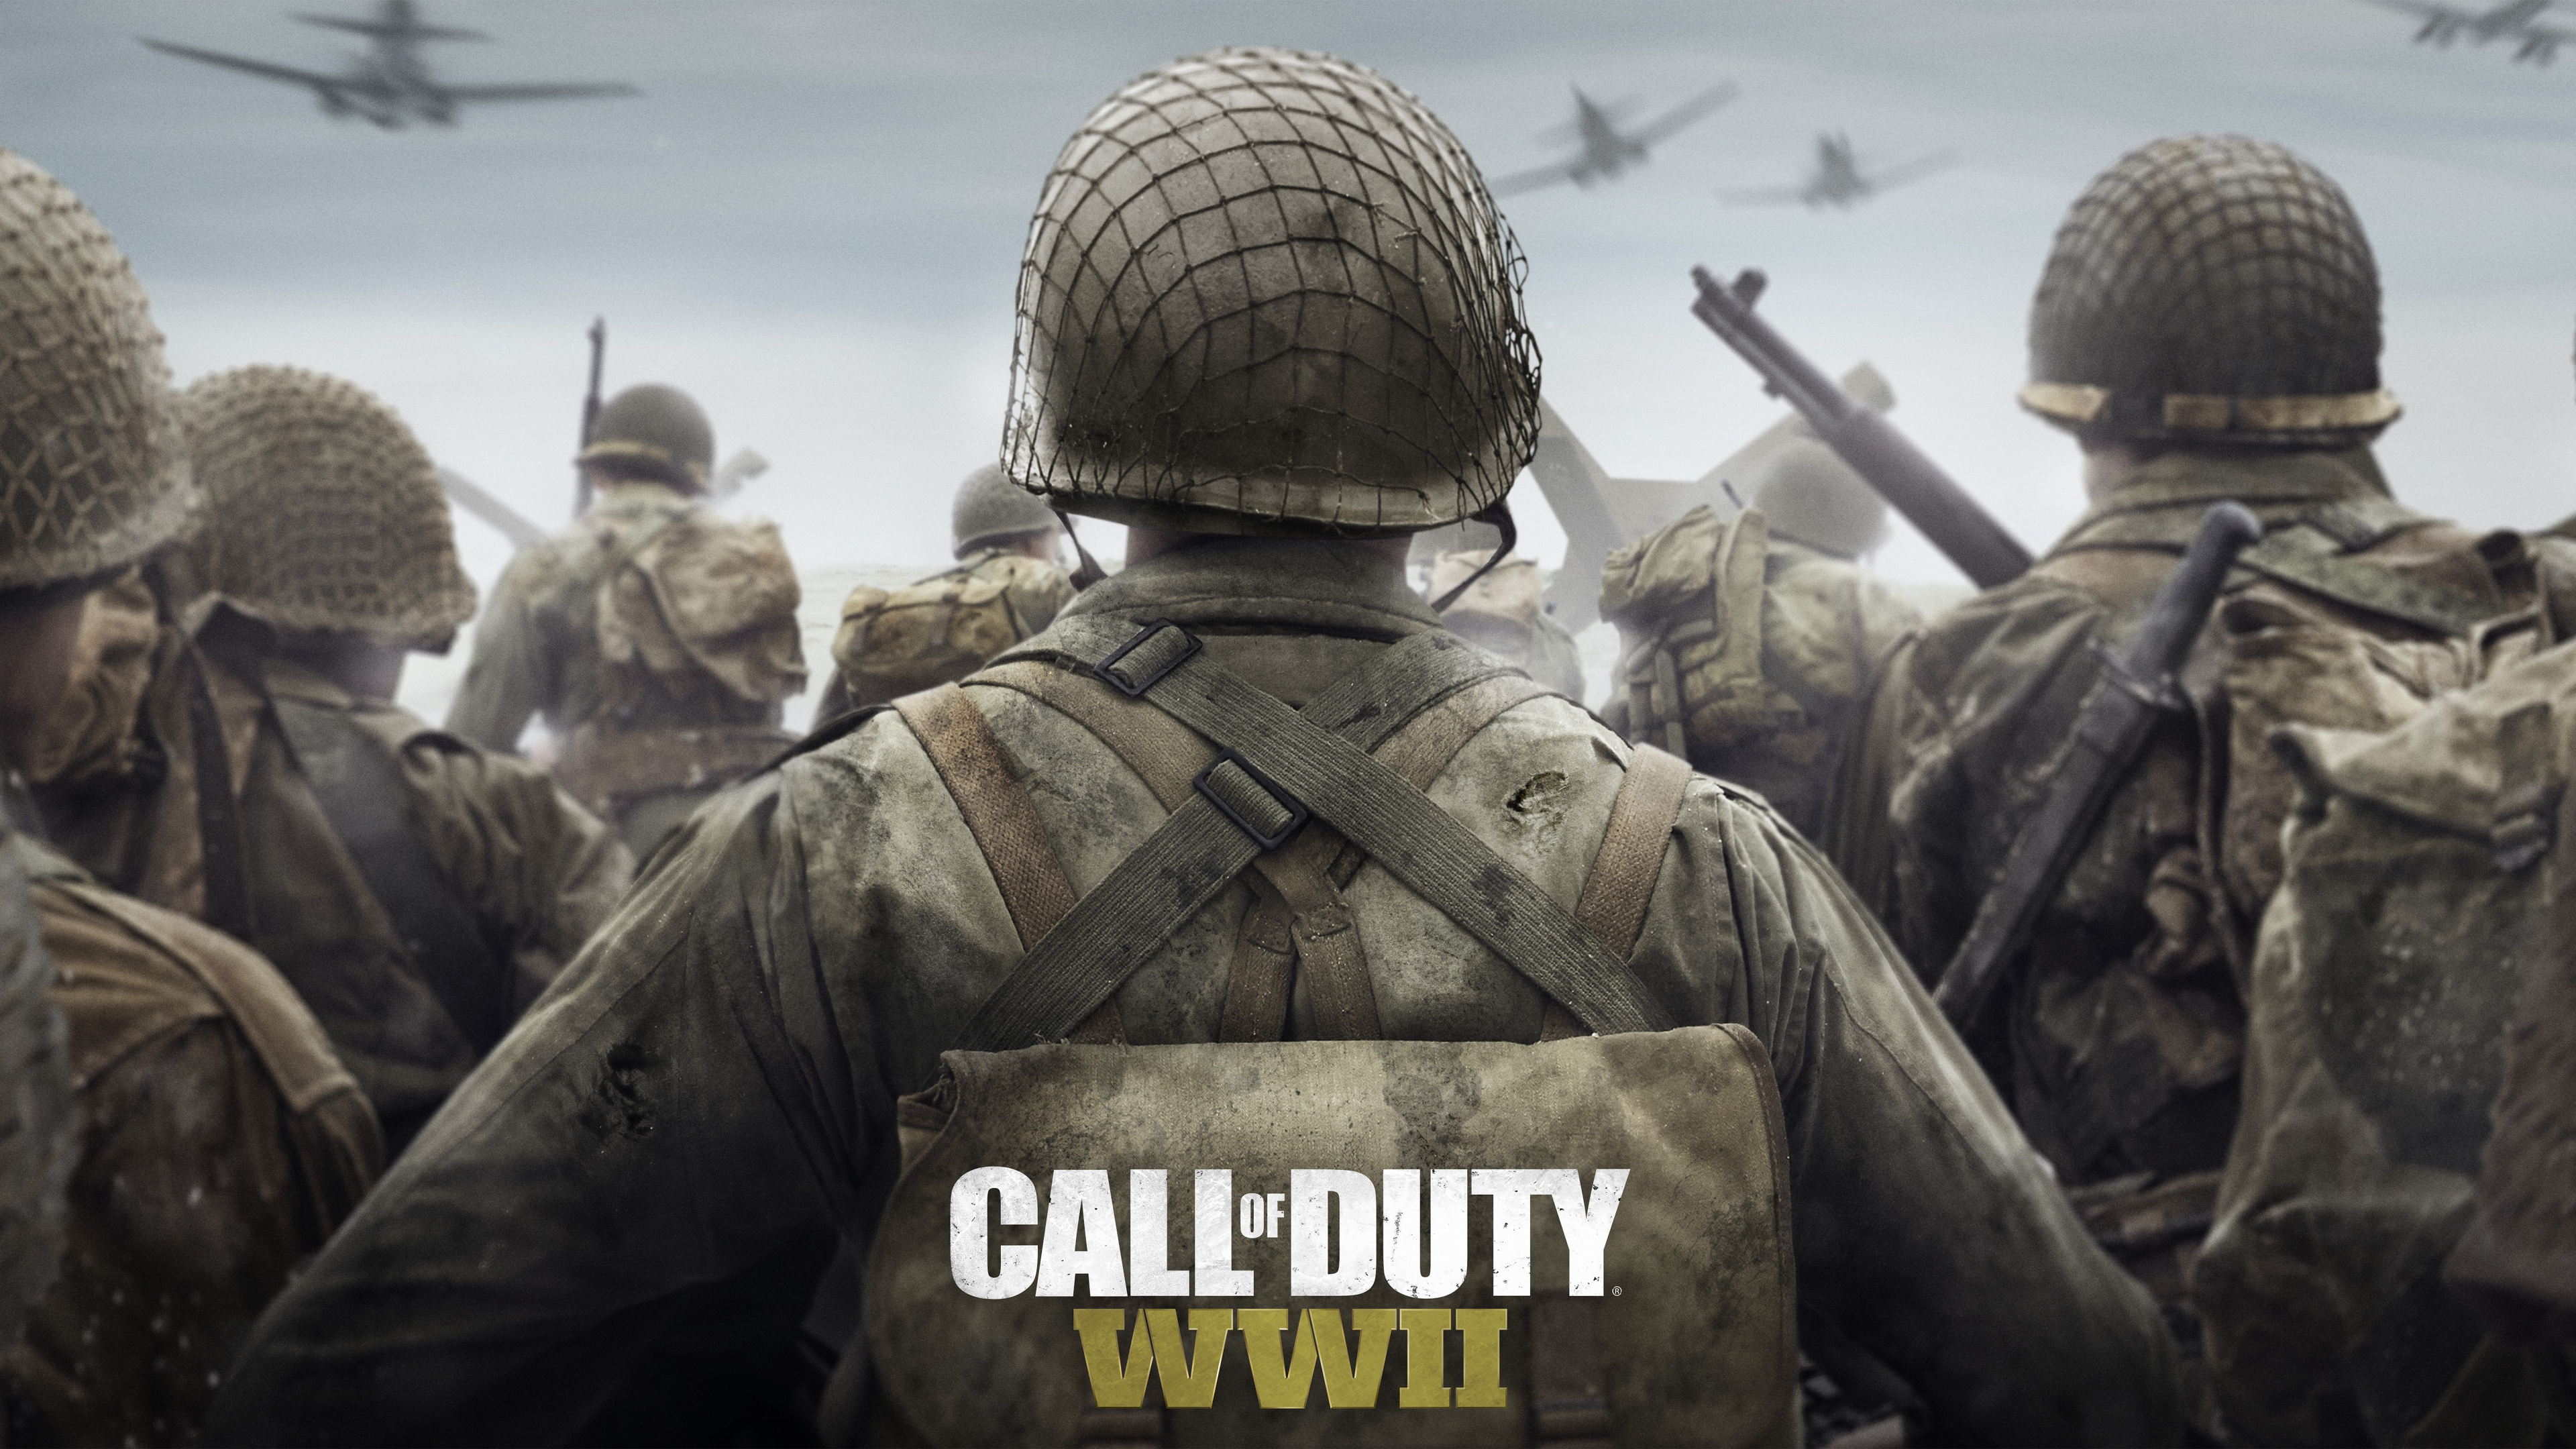 Call of Duty Ww2, Call of Duty WWII, Activision, Sledgehammer Games, Soldier. Wallpaper in 3840x2160 Resolution